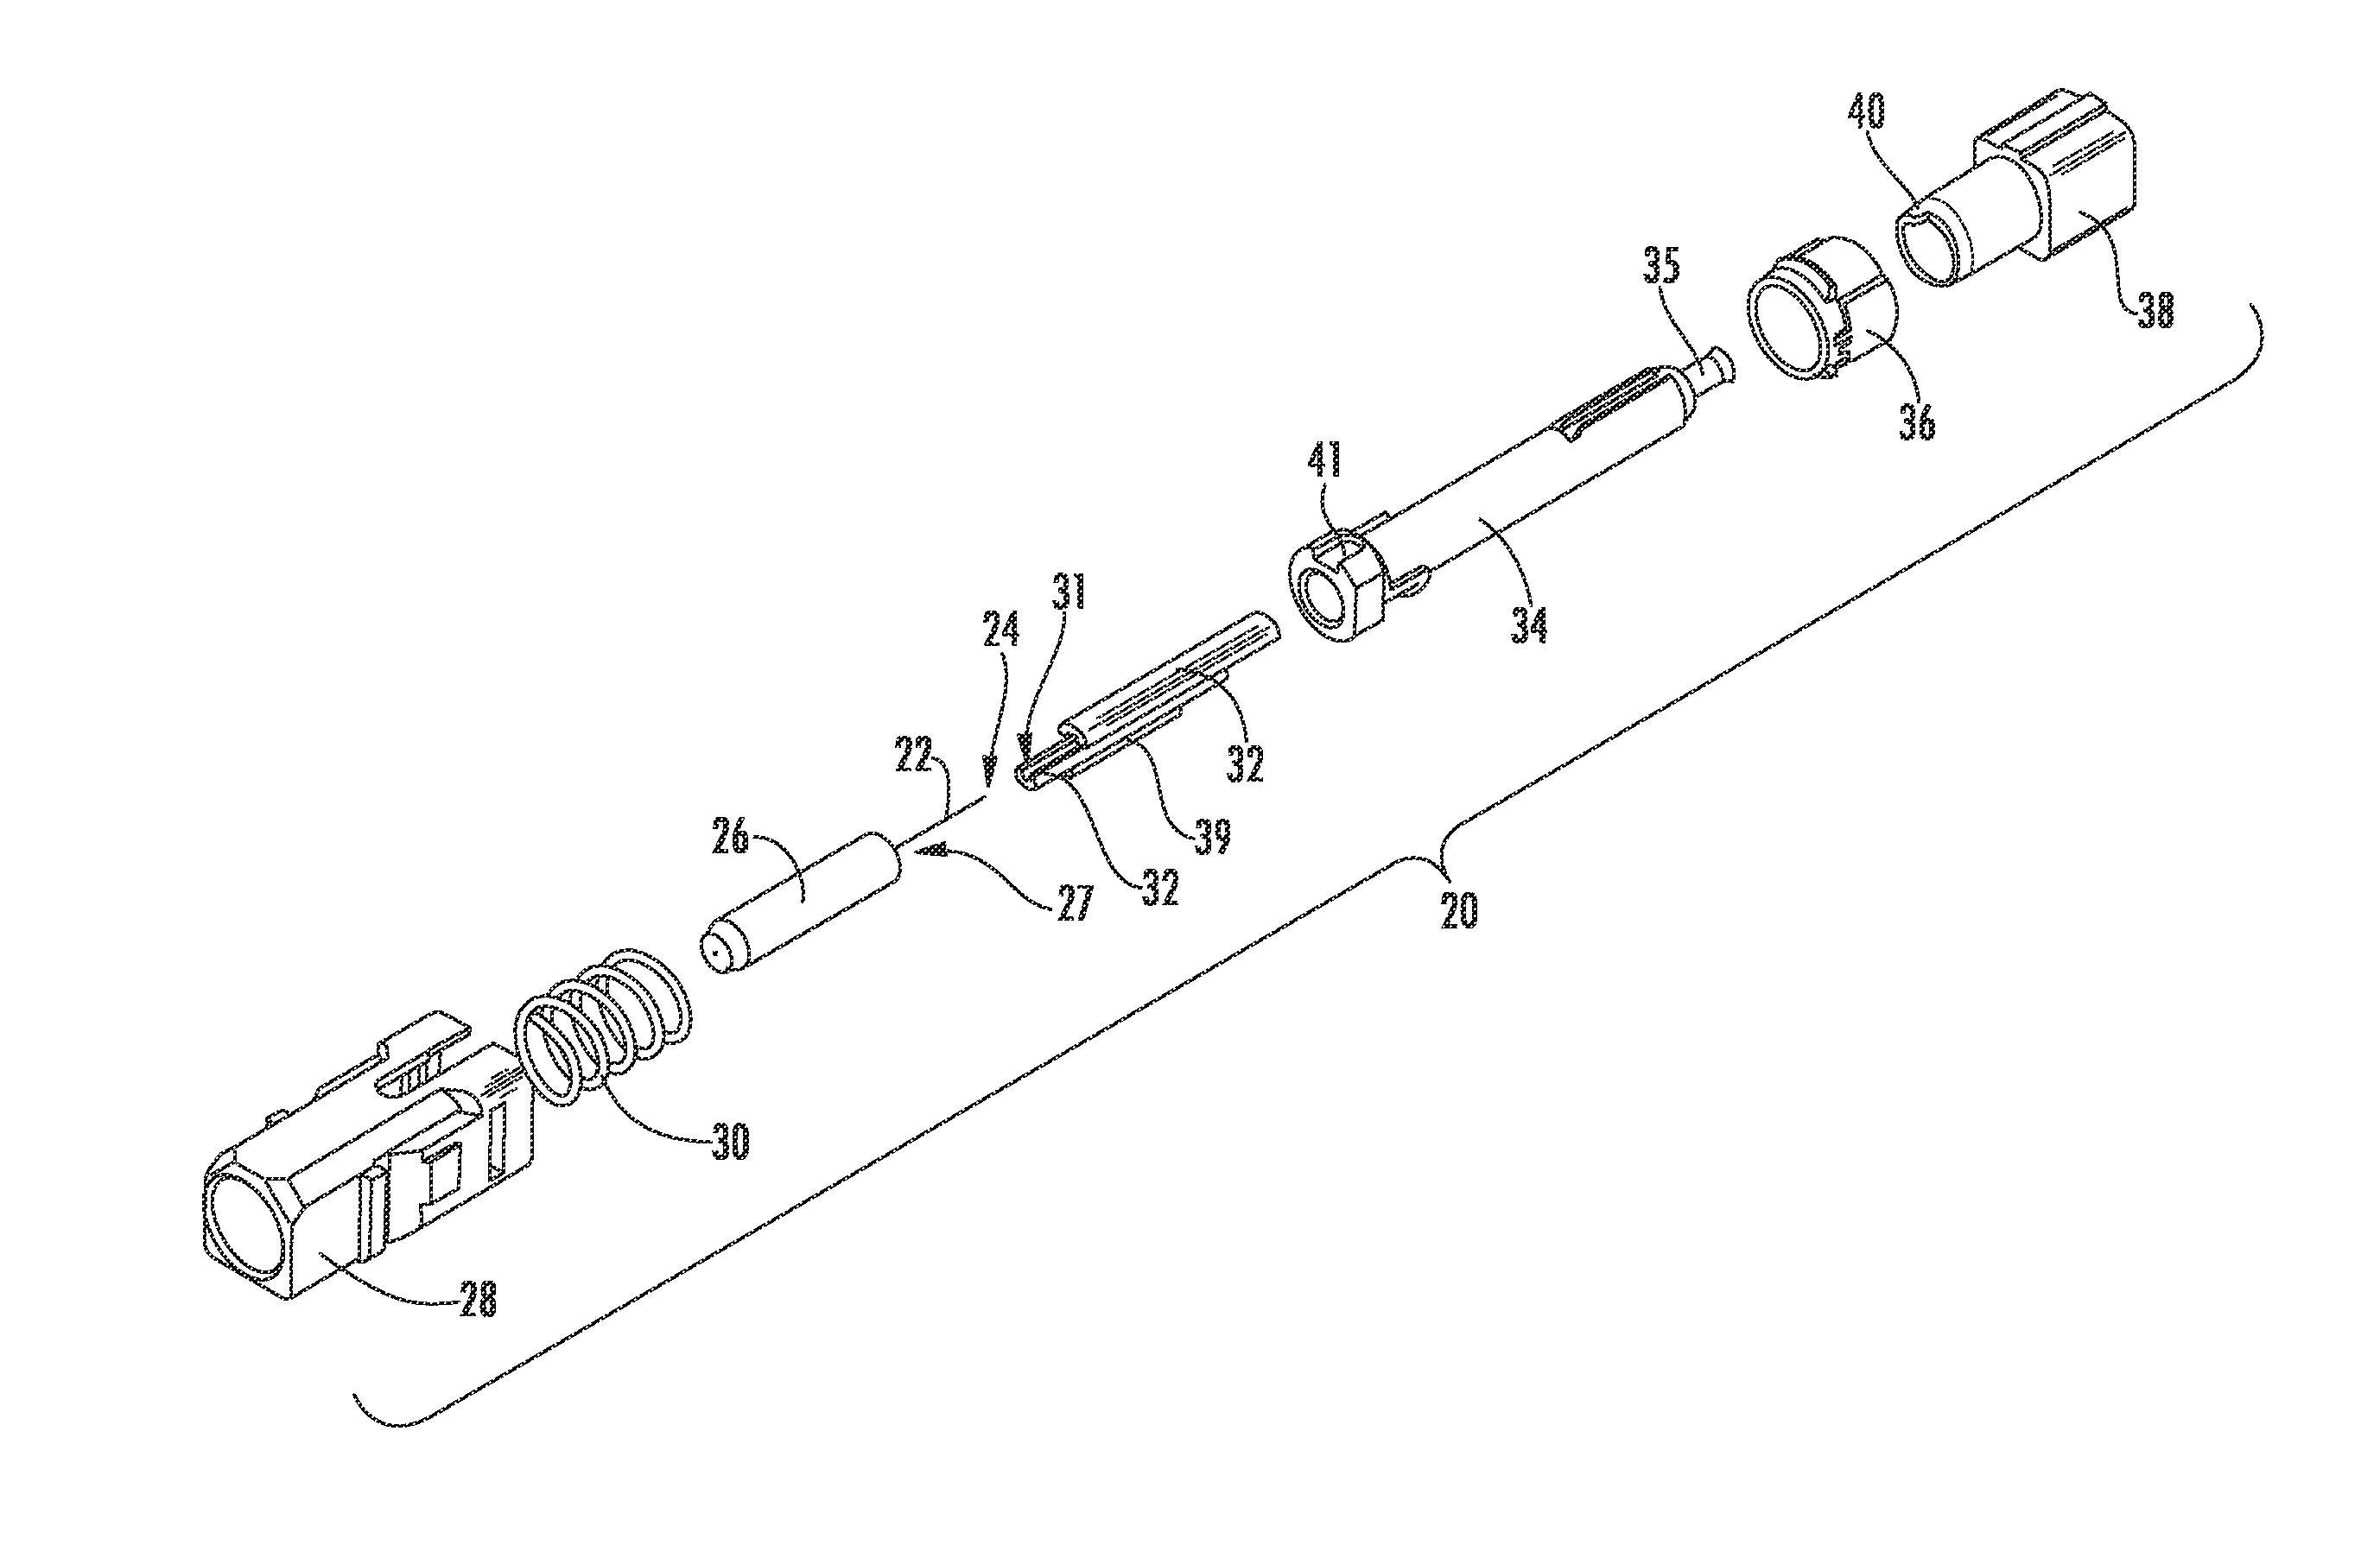 Laser-shaped optical fibers along with optical assemblies and methods therefor